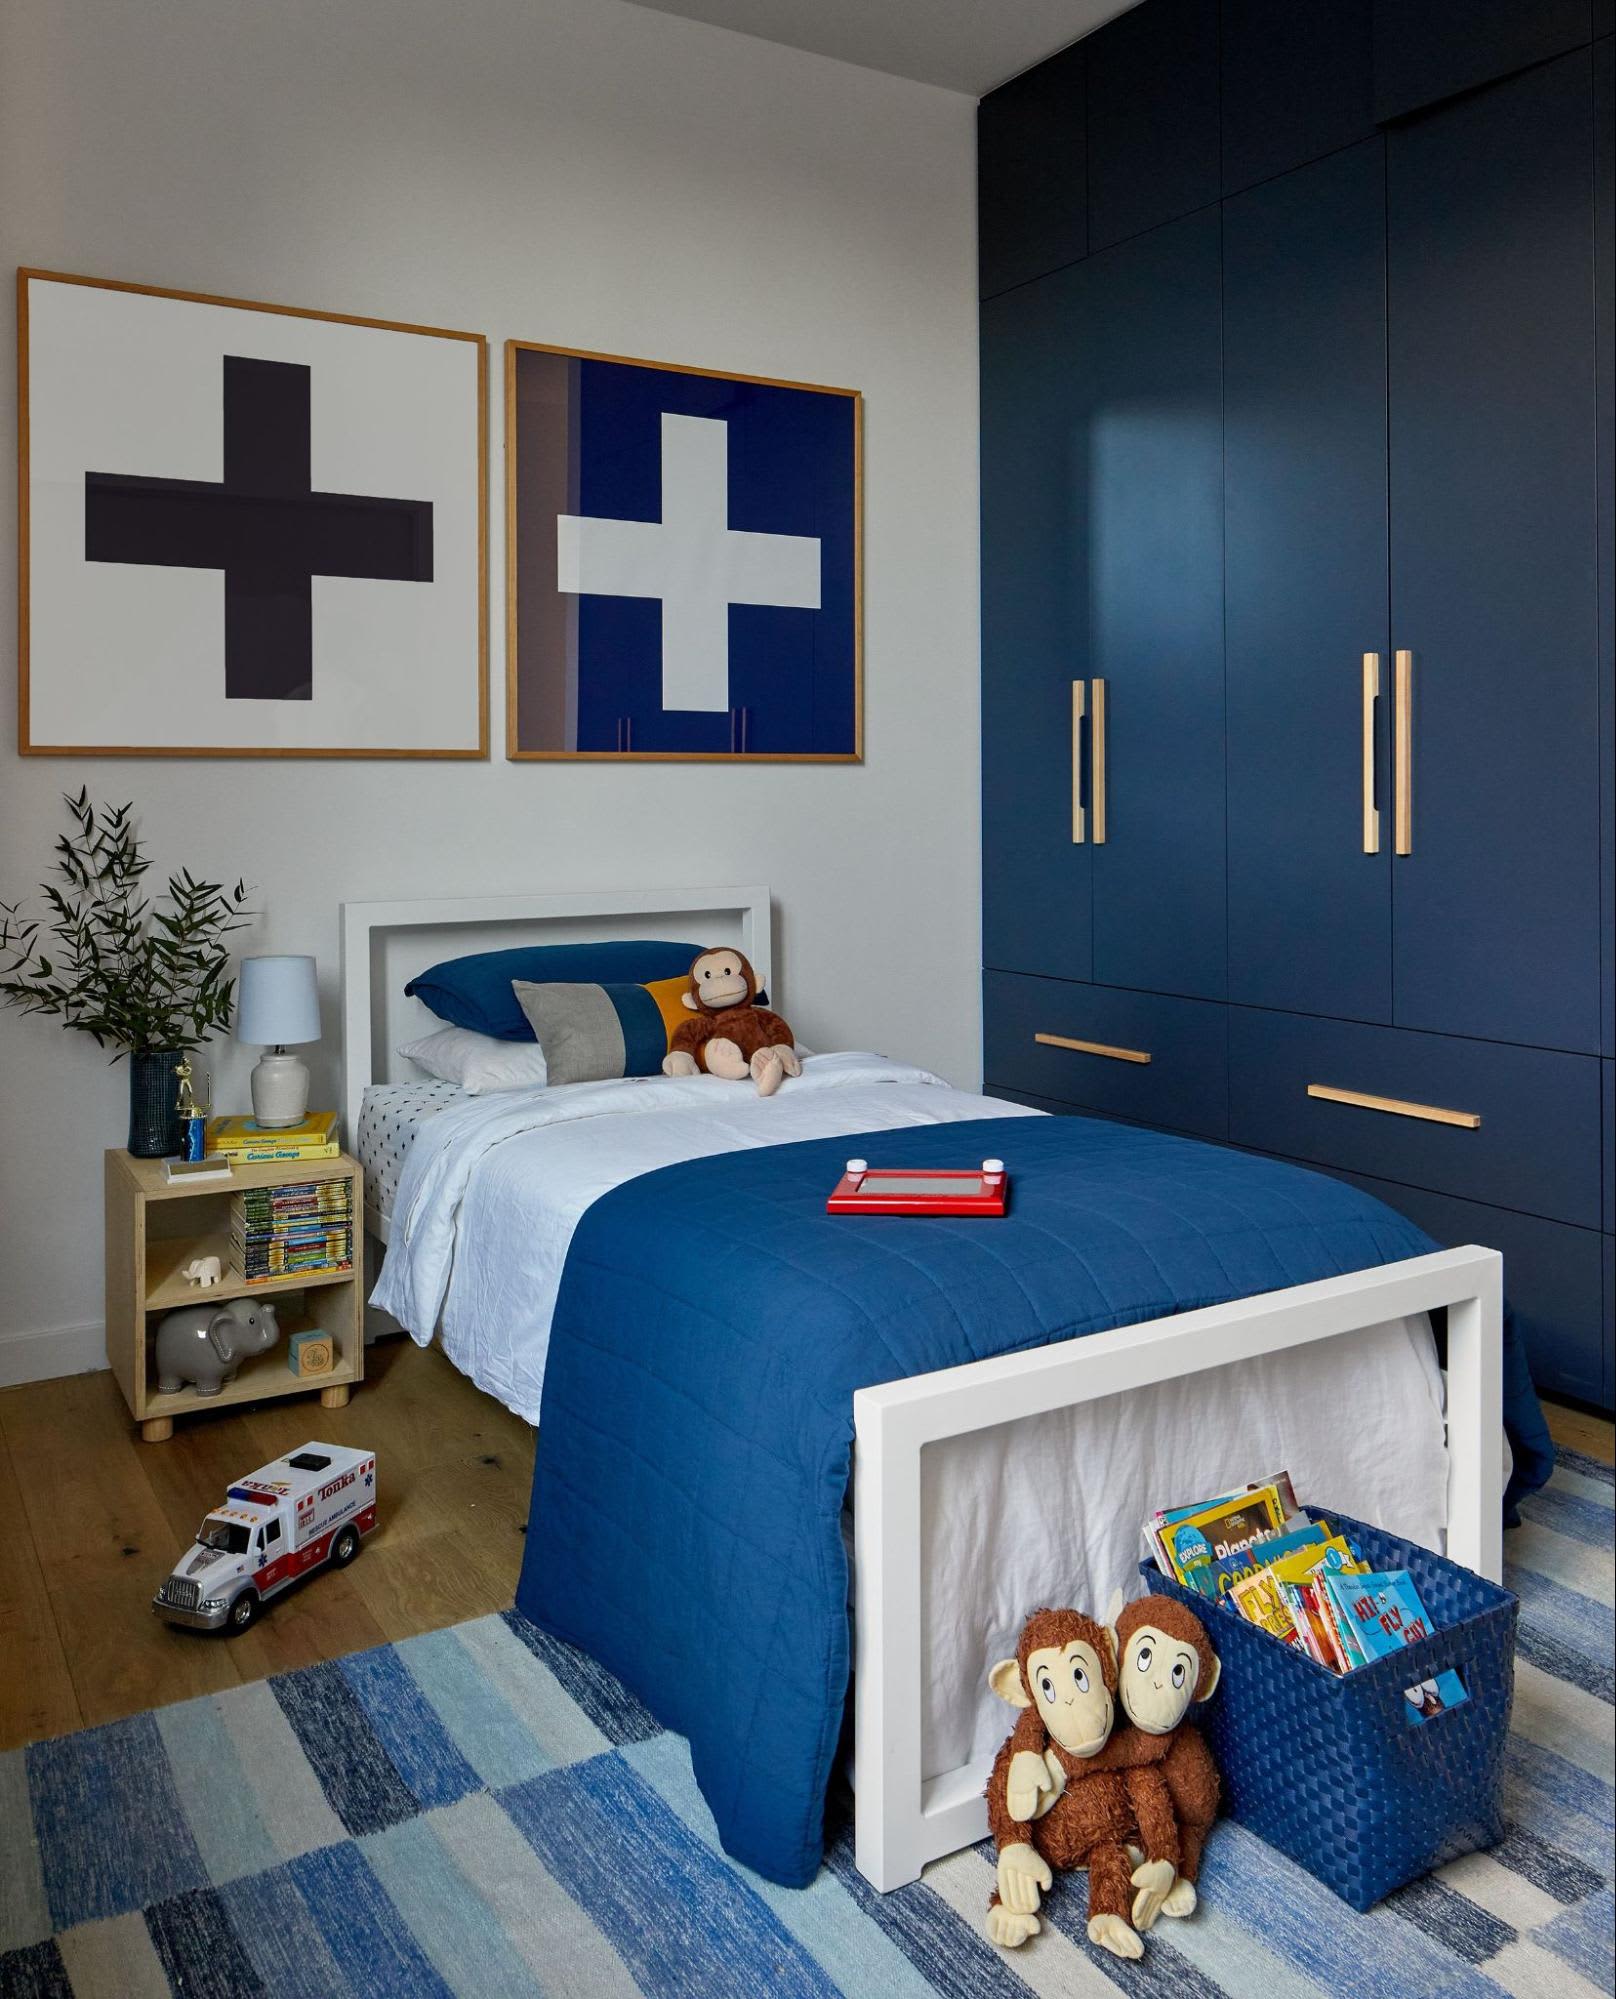 Best Types of Paints for Children's Rooms